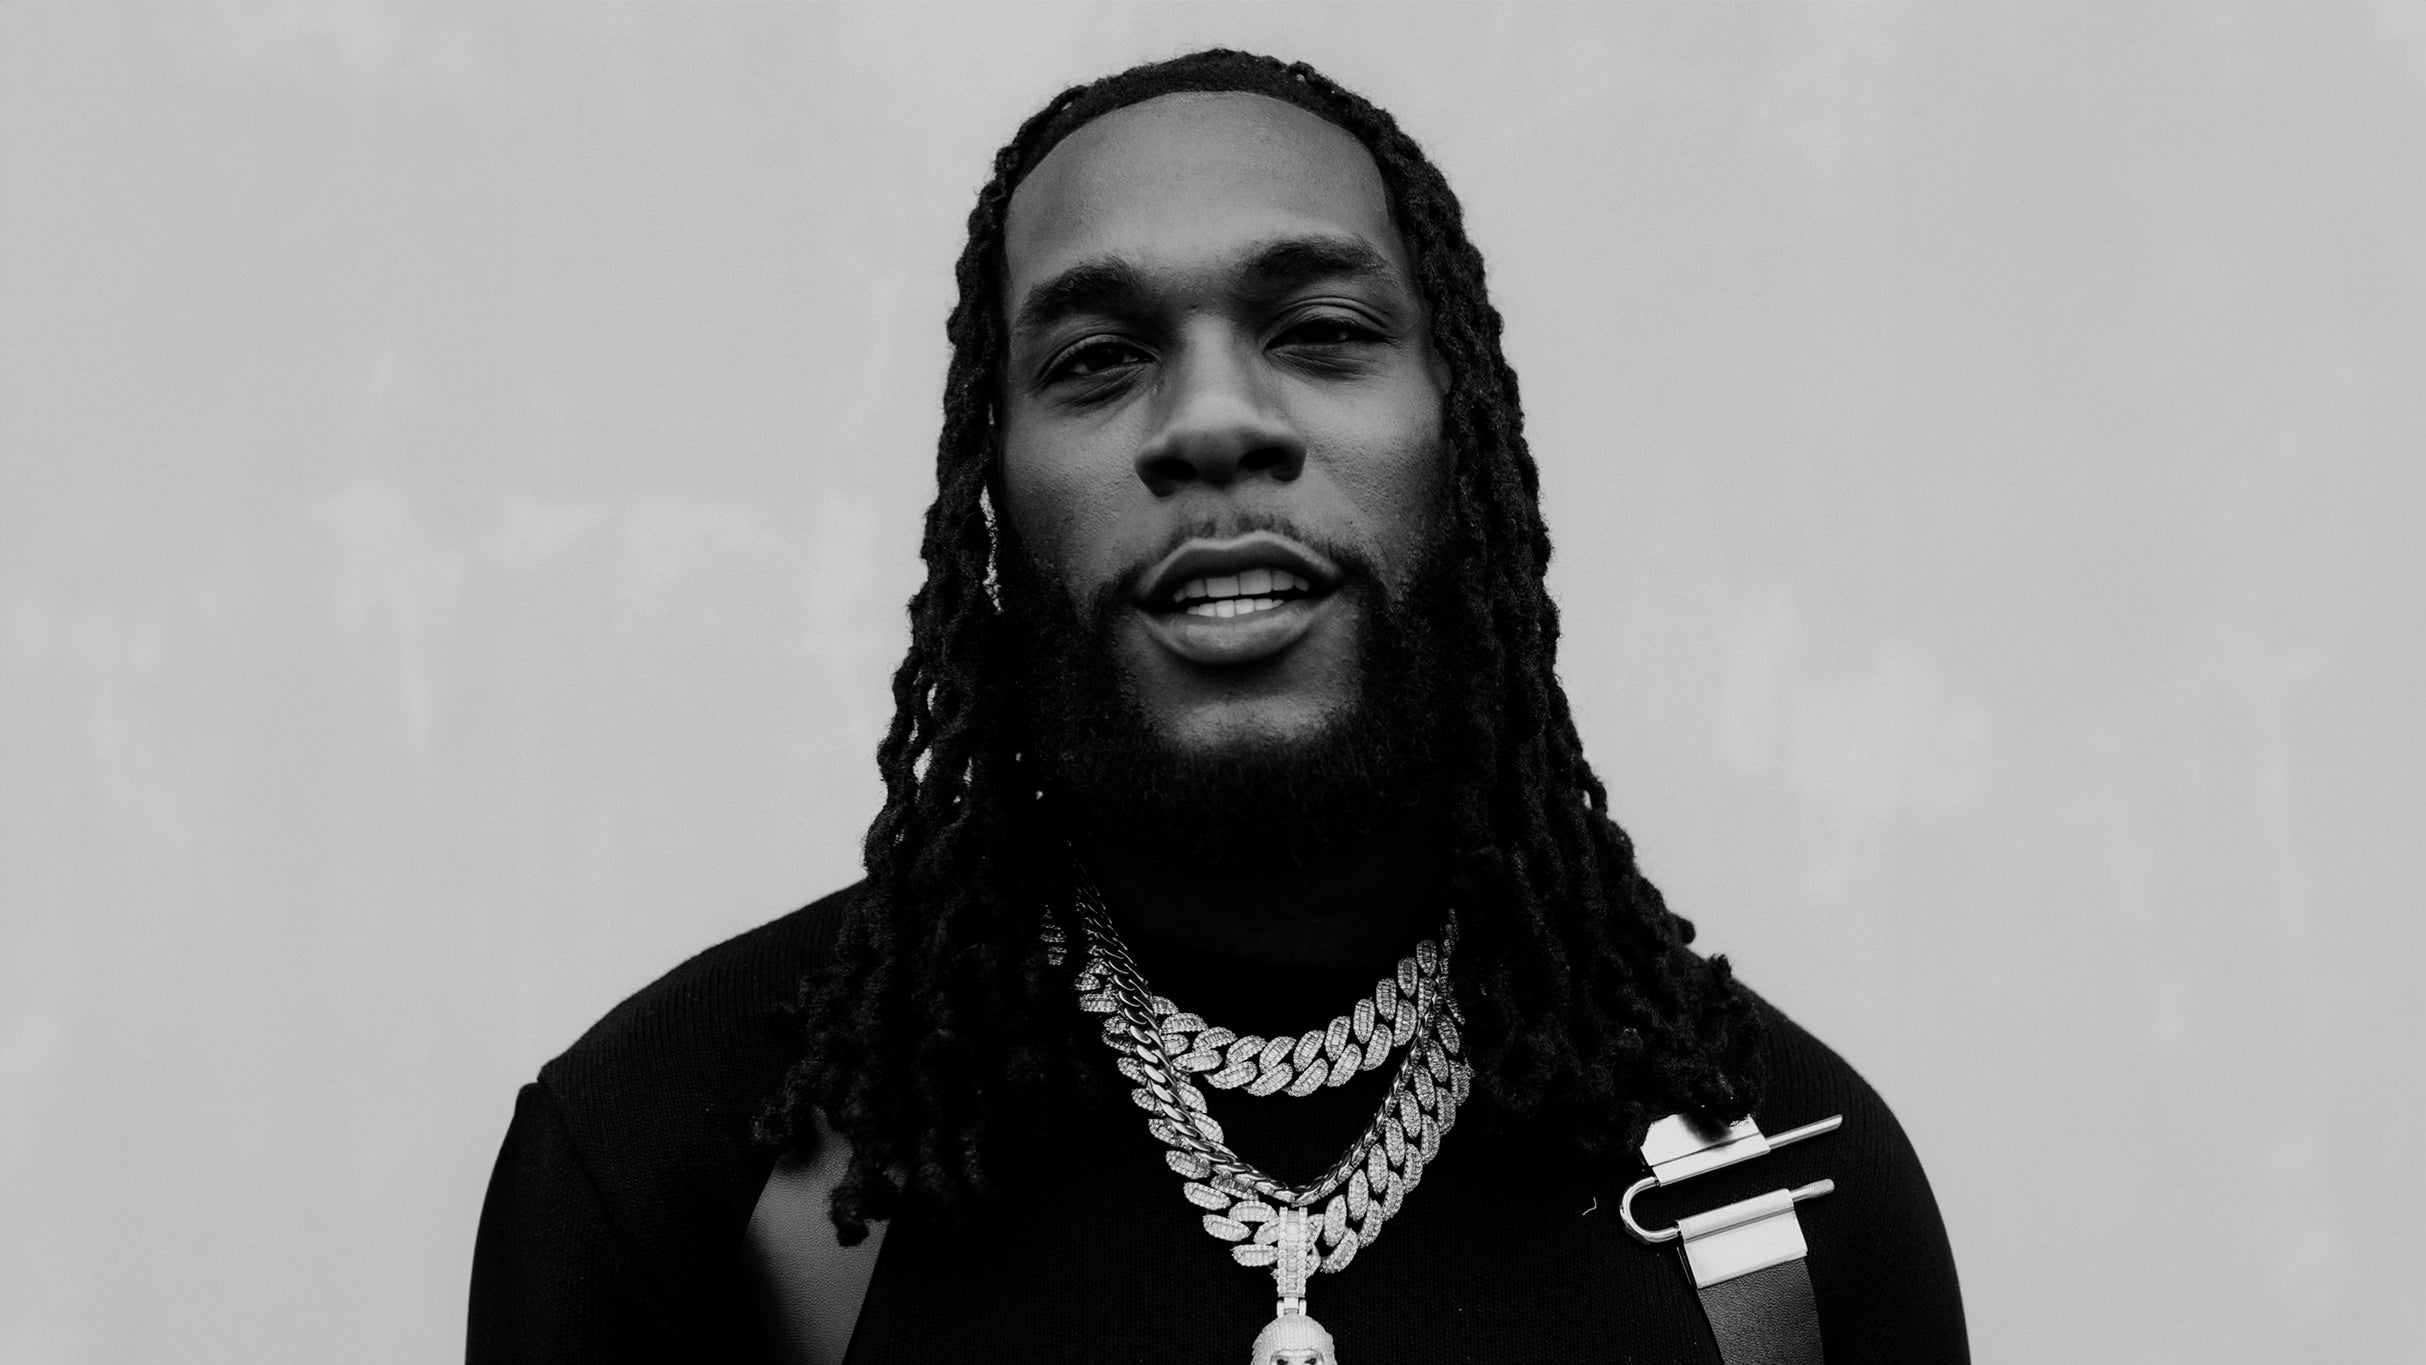 Burna Boy: I Told Them Tour free presale code for early tickets in Toronto